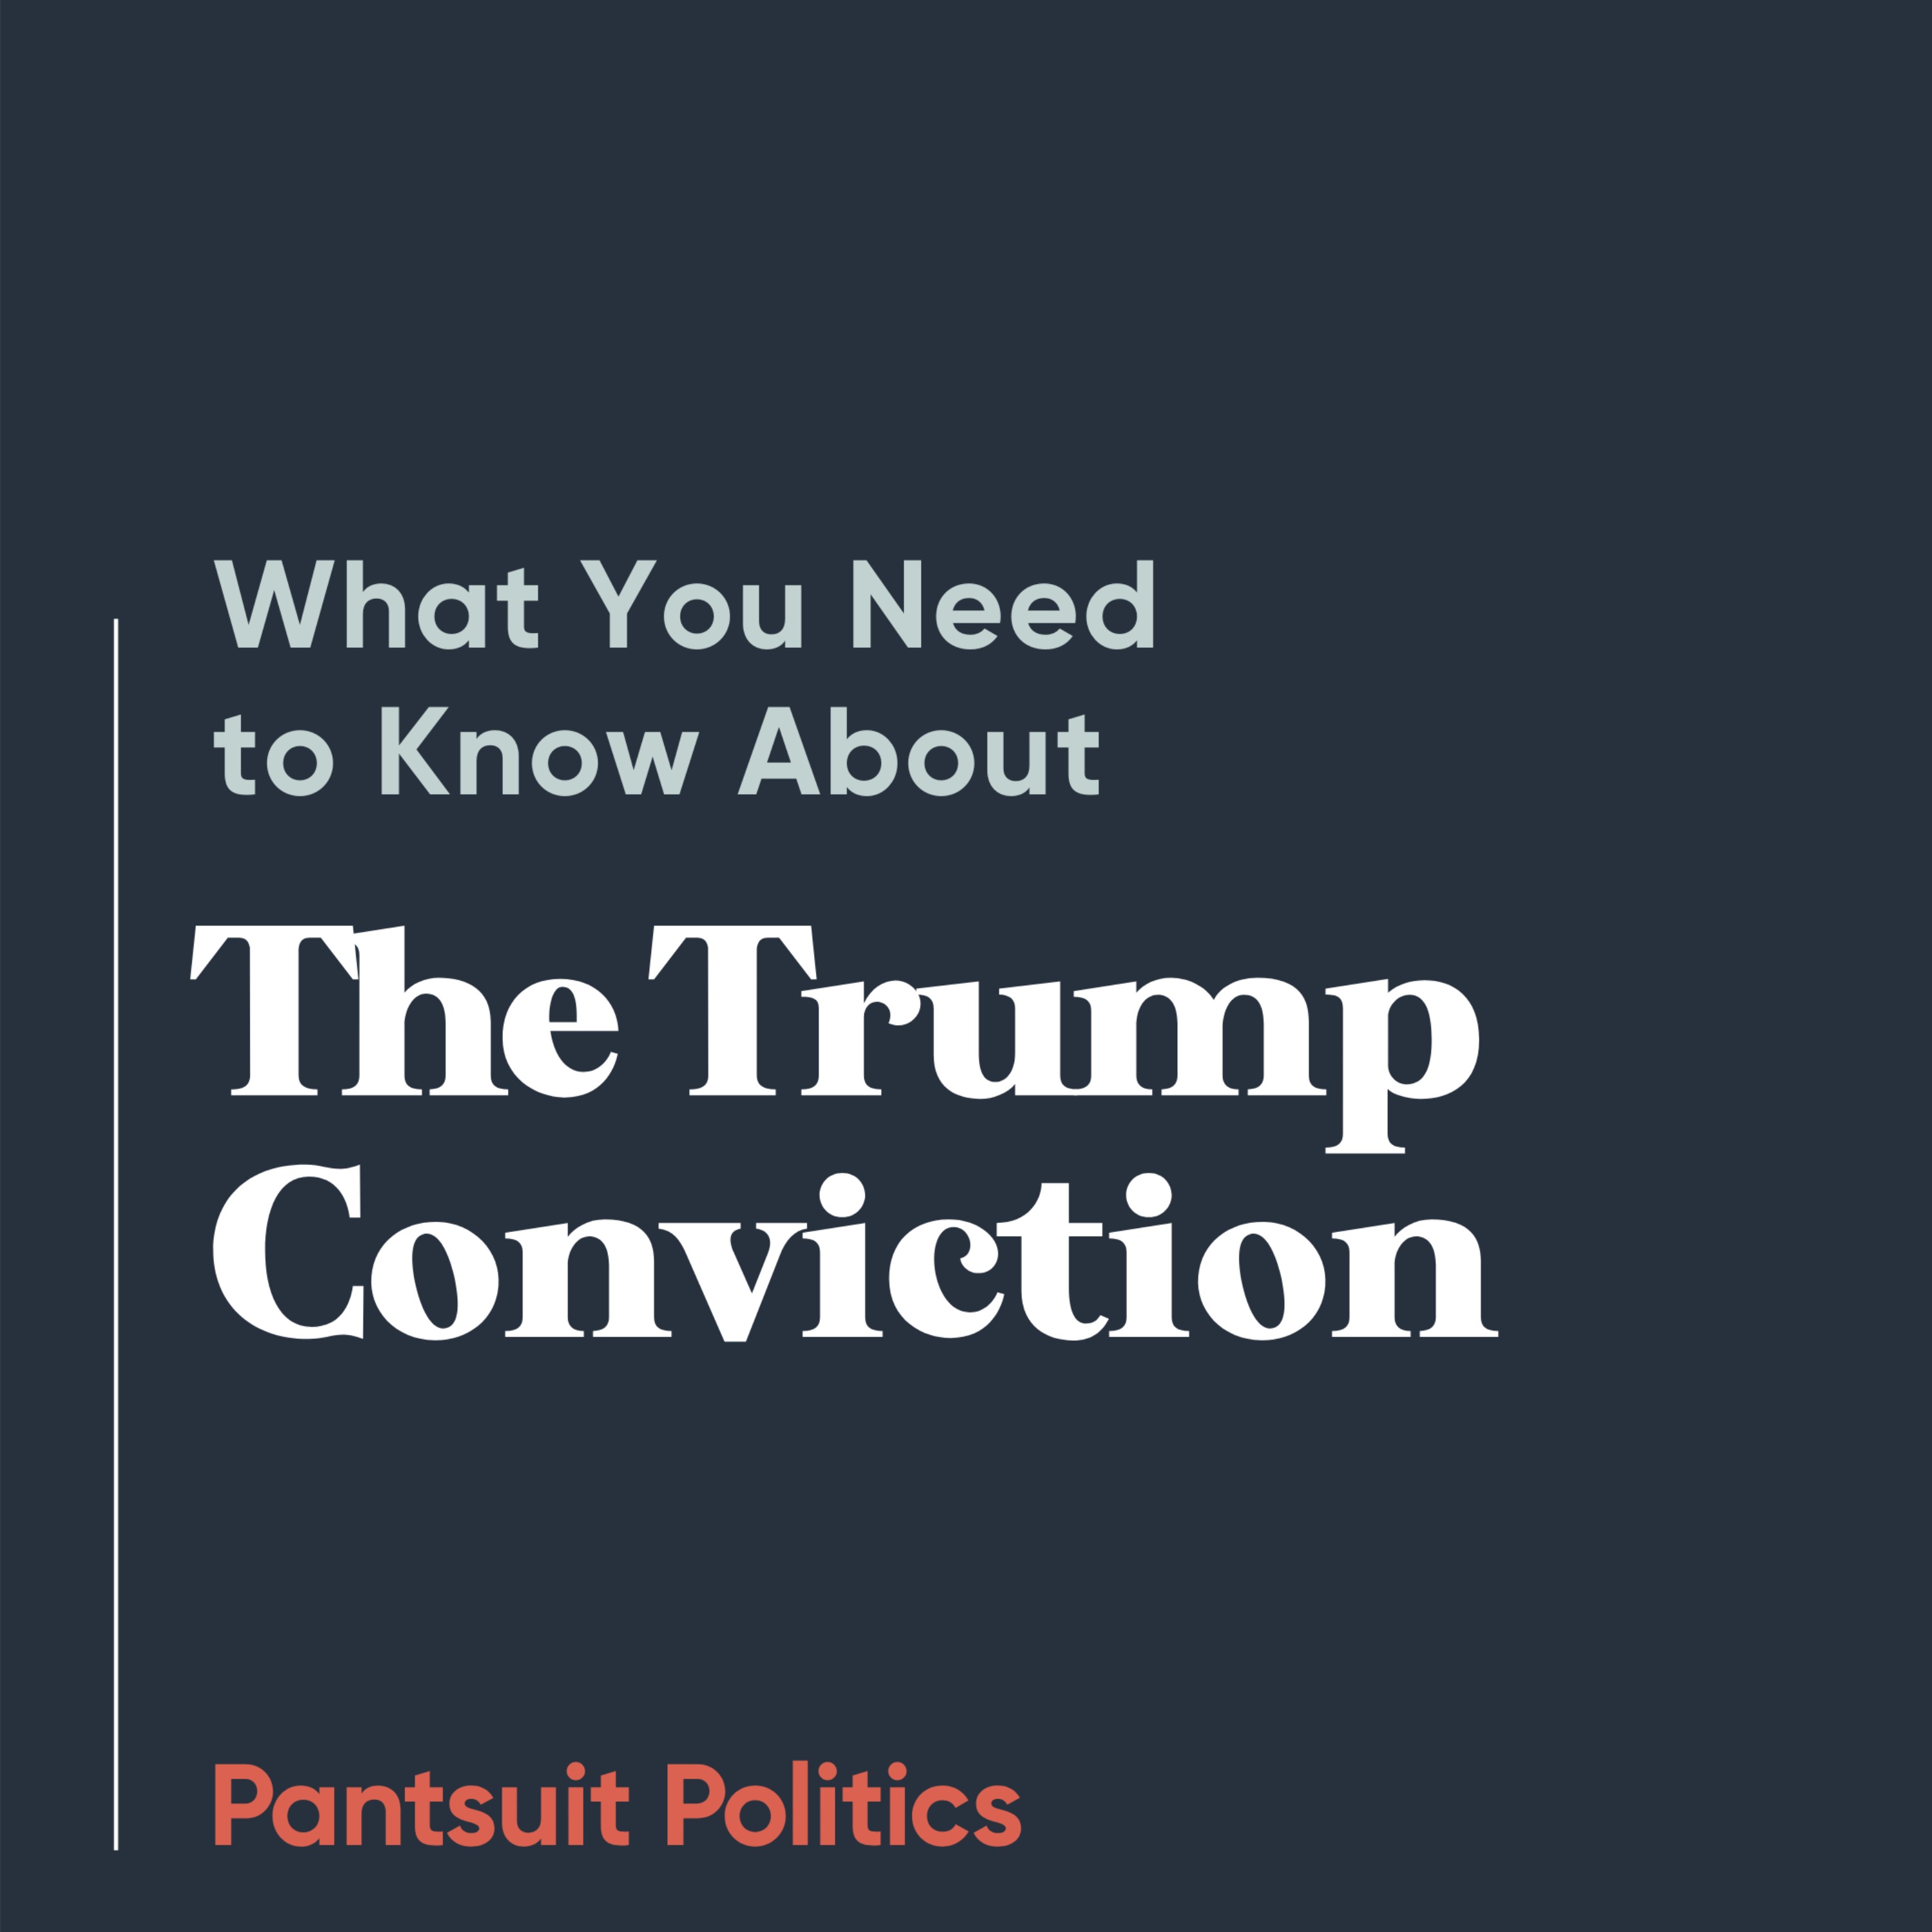 What You Need to Know About the Trump Conviction